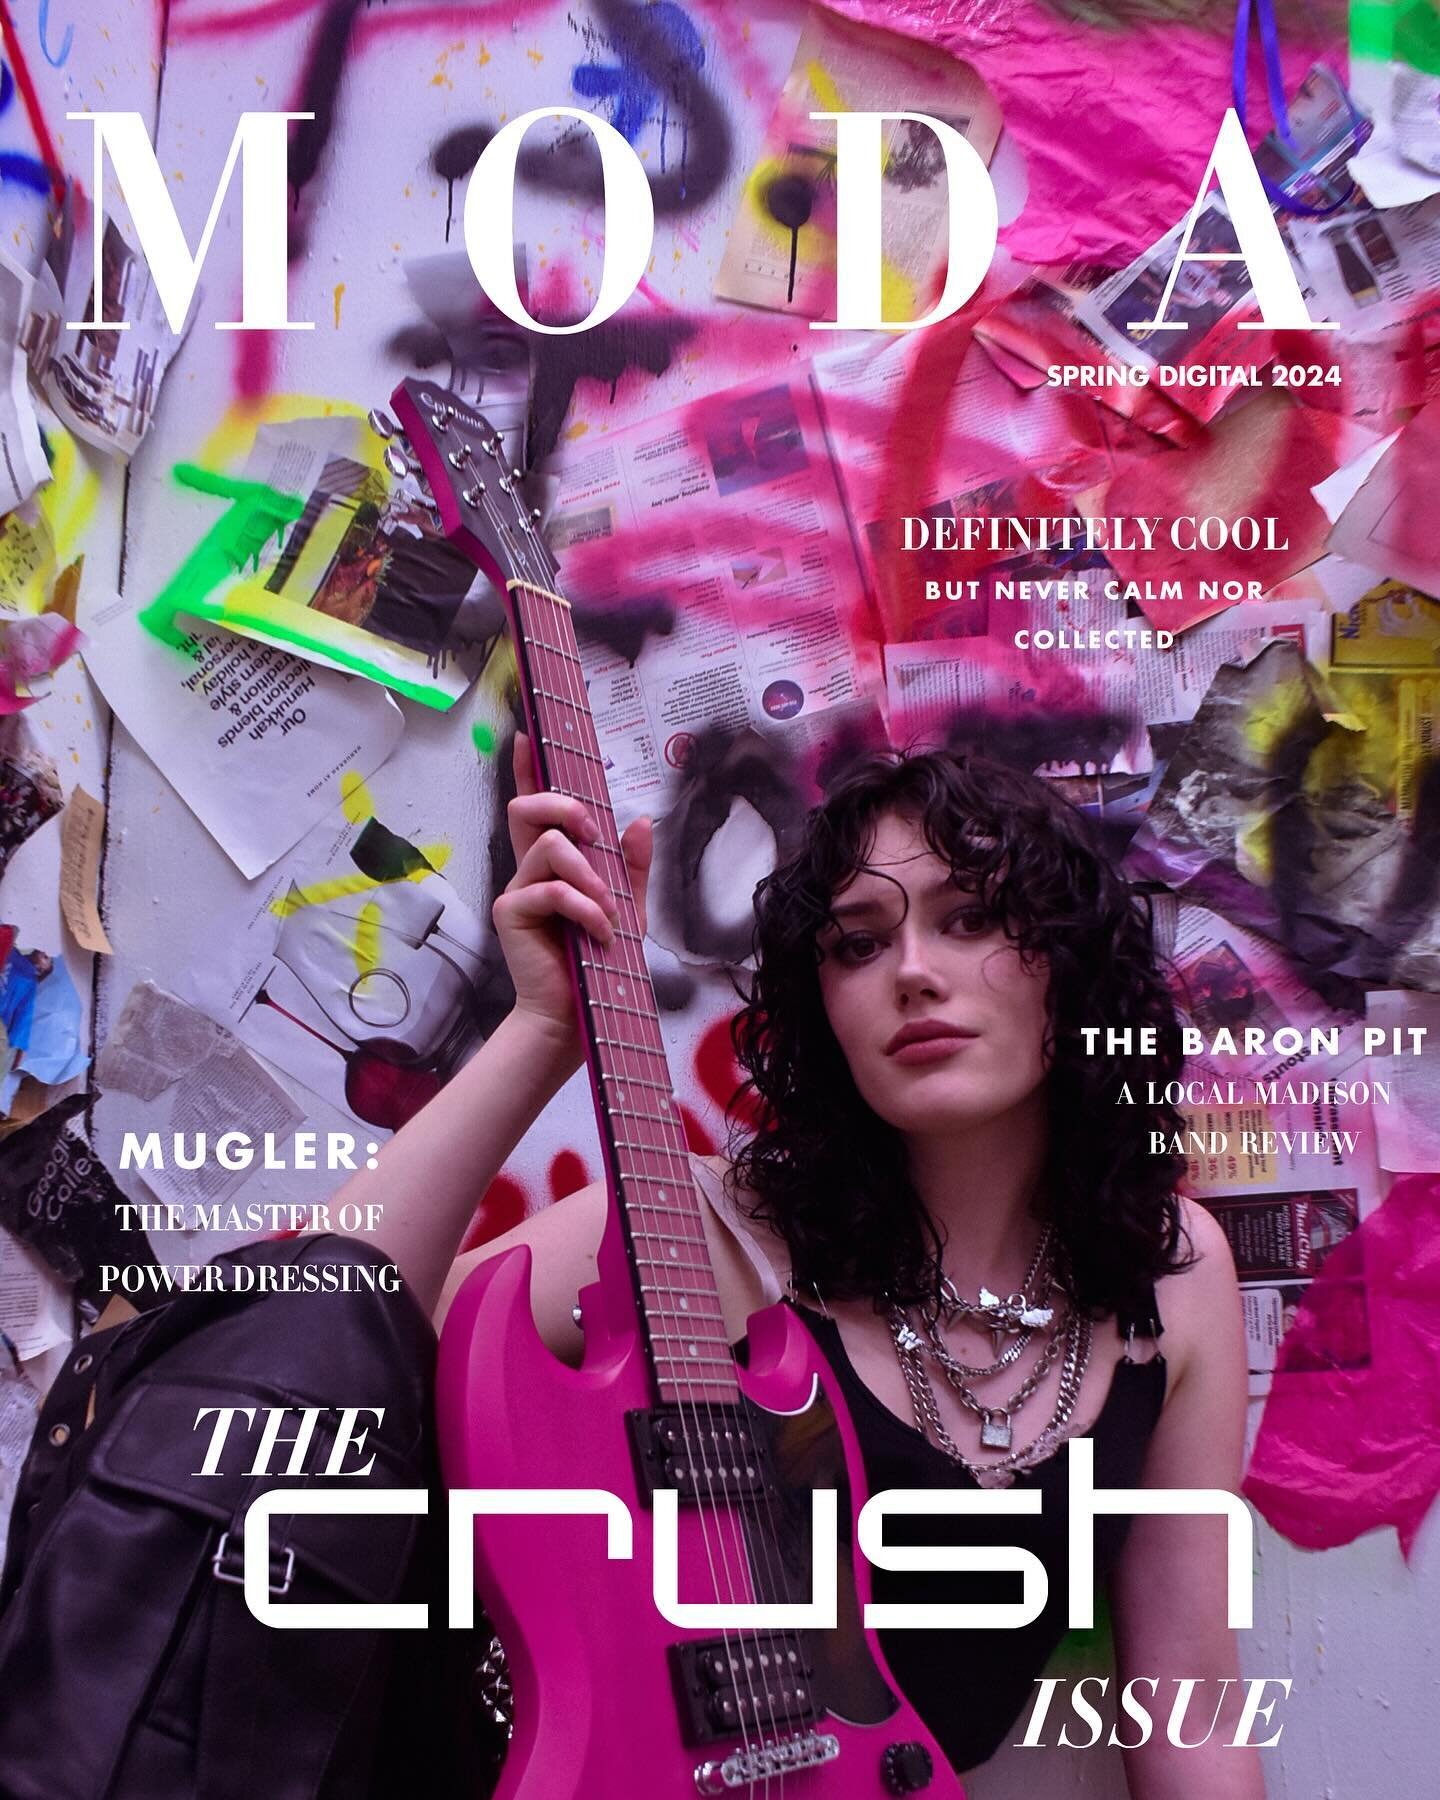 Moda presents: CRUSH.

Crush is about being &ldquo;young, wild and free.&rdquo; Crush is spunky, electric and powerful.

Please indulge in our Spring Digital issue. We hope you enjoy the creativity behind the graphics, photoshoots and articles our me